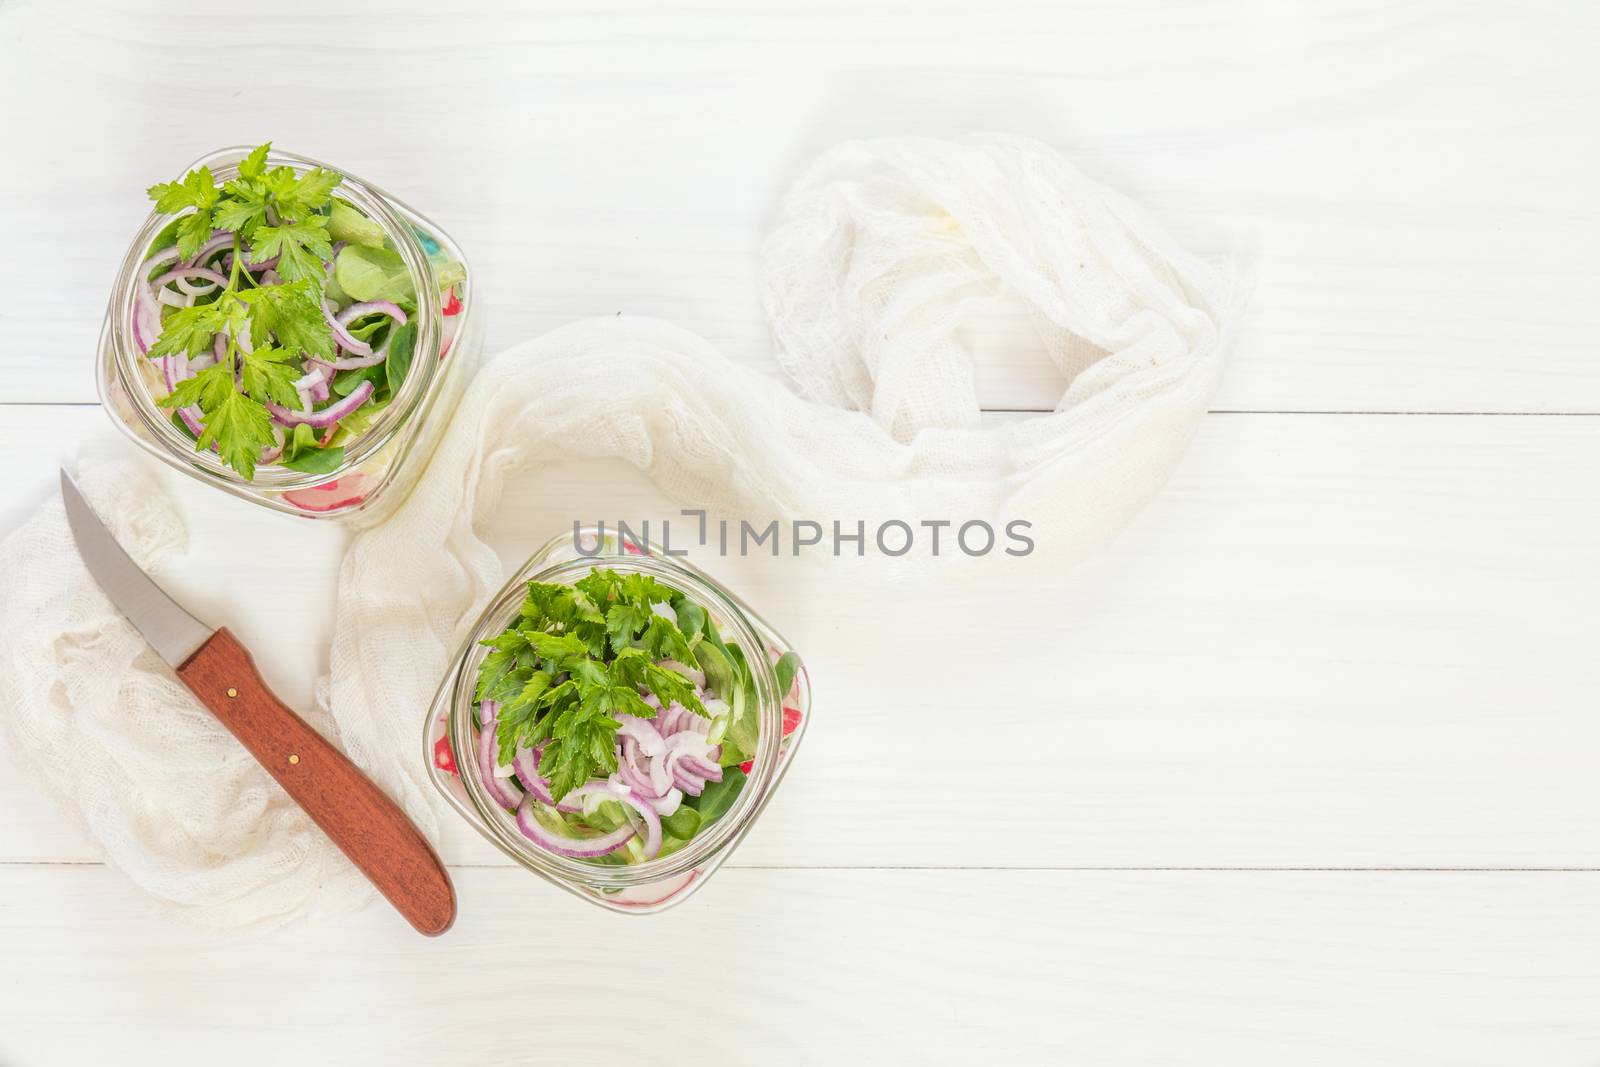 Homemade healthy salads with vegetables, onion, parsley and lettuce in jar. Toning. Selective focus.